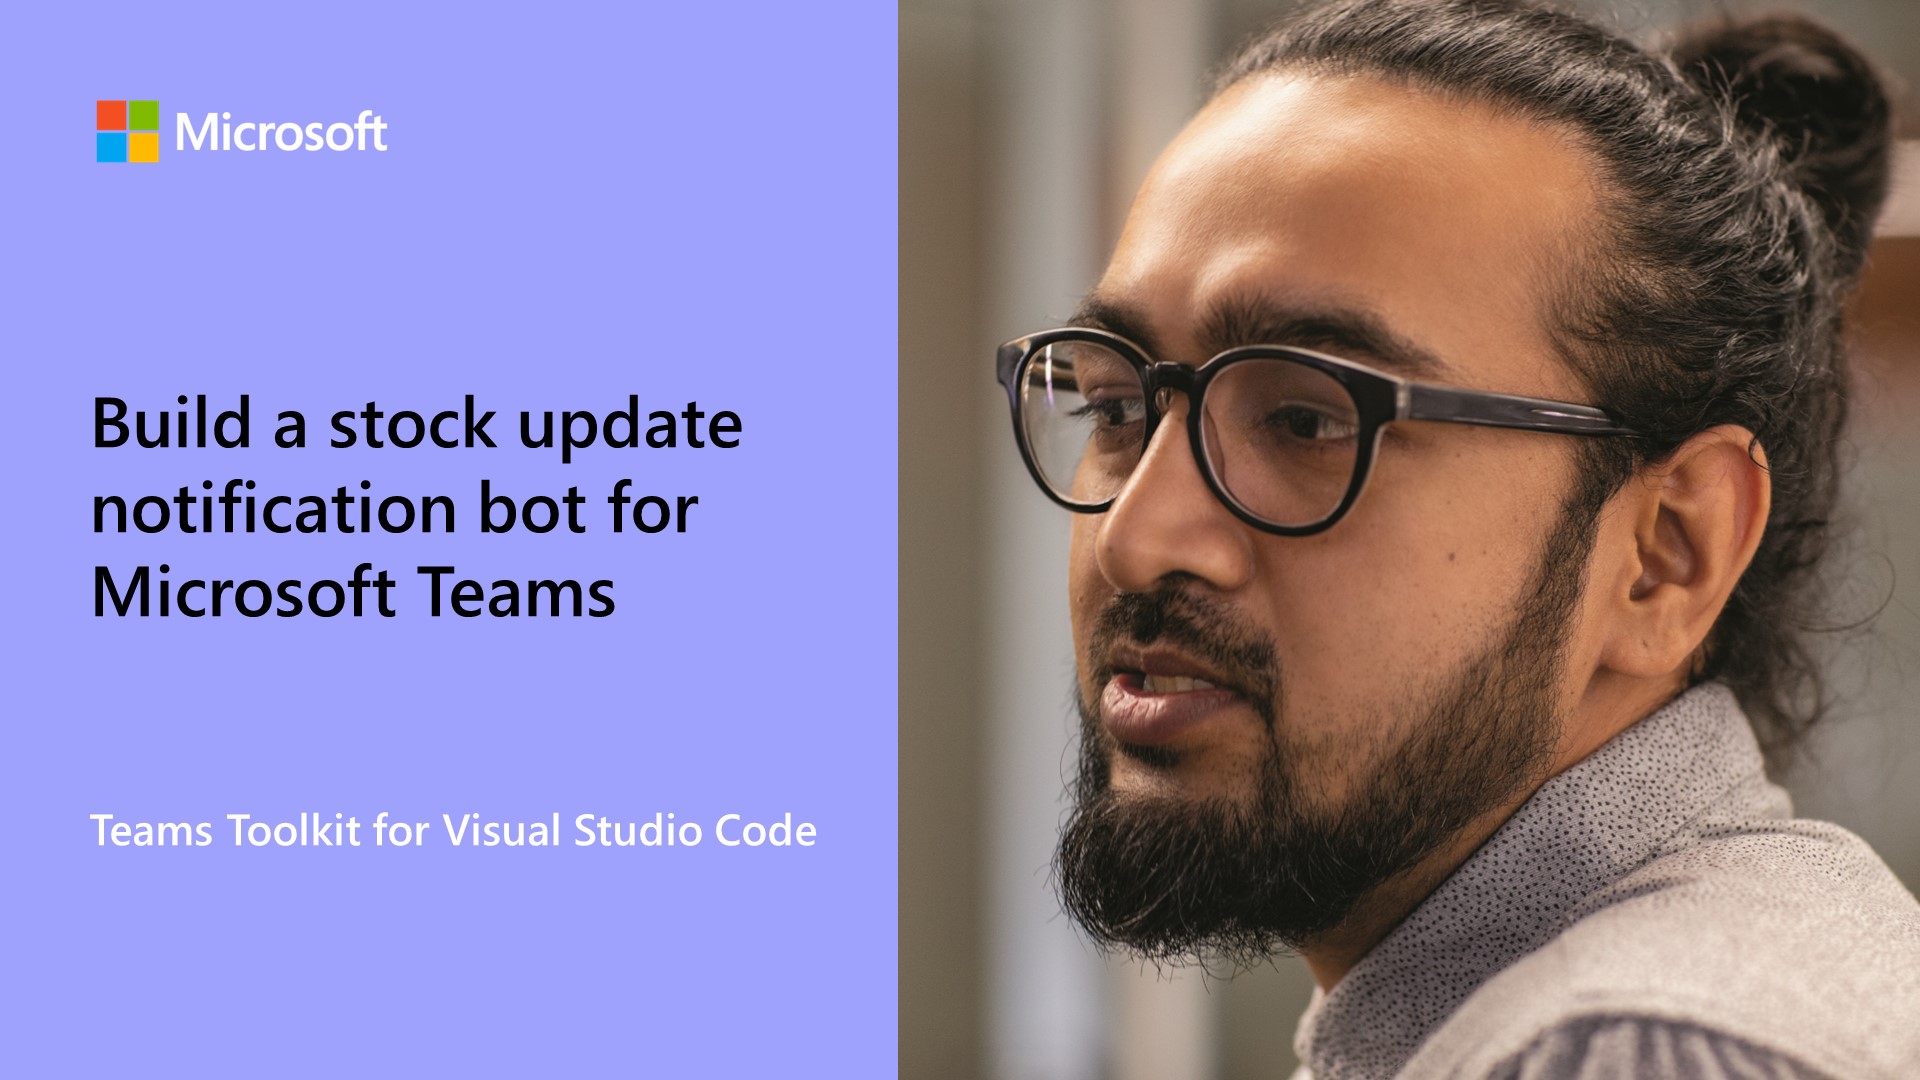 Build a stock update notification bot for Microsoft Teams using Teams Toolkit for Visual Studio Code